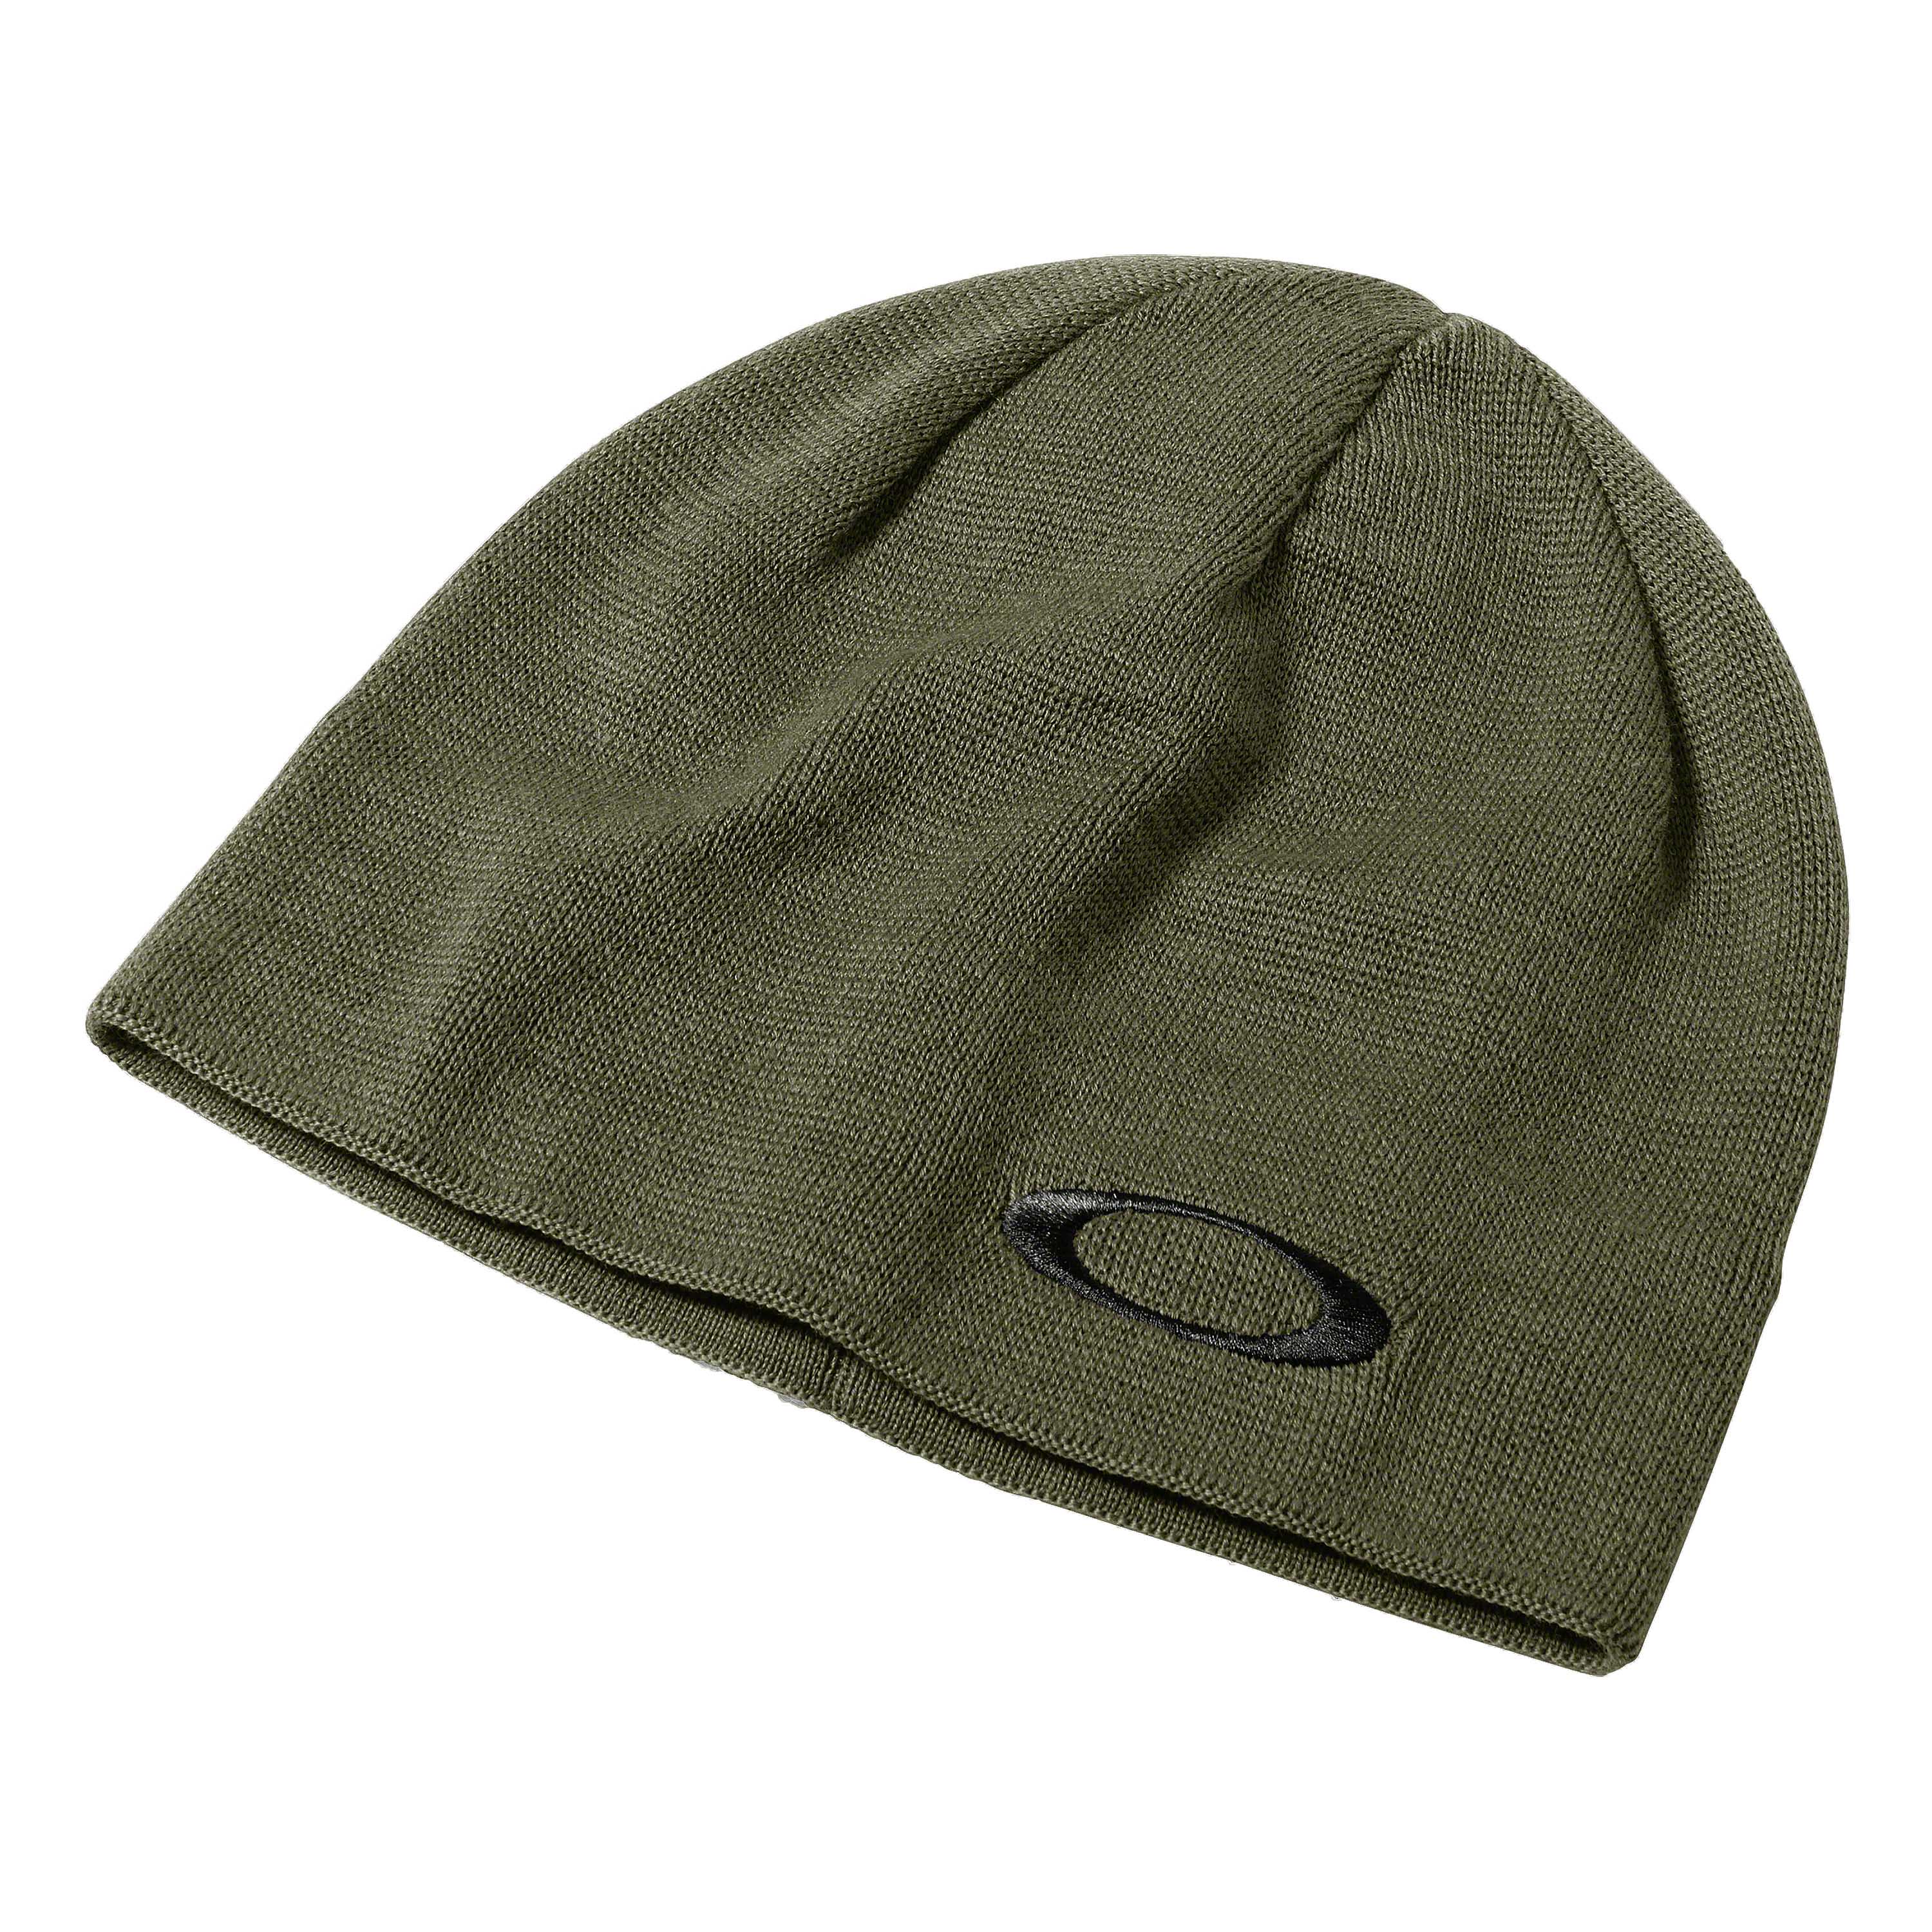 Oakley Tactical Beanie olive by ASMC